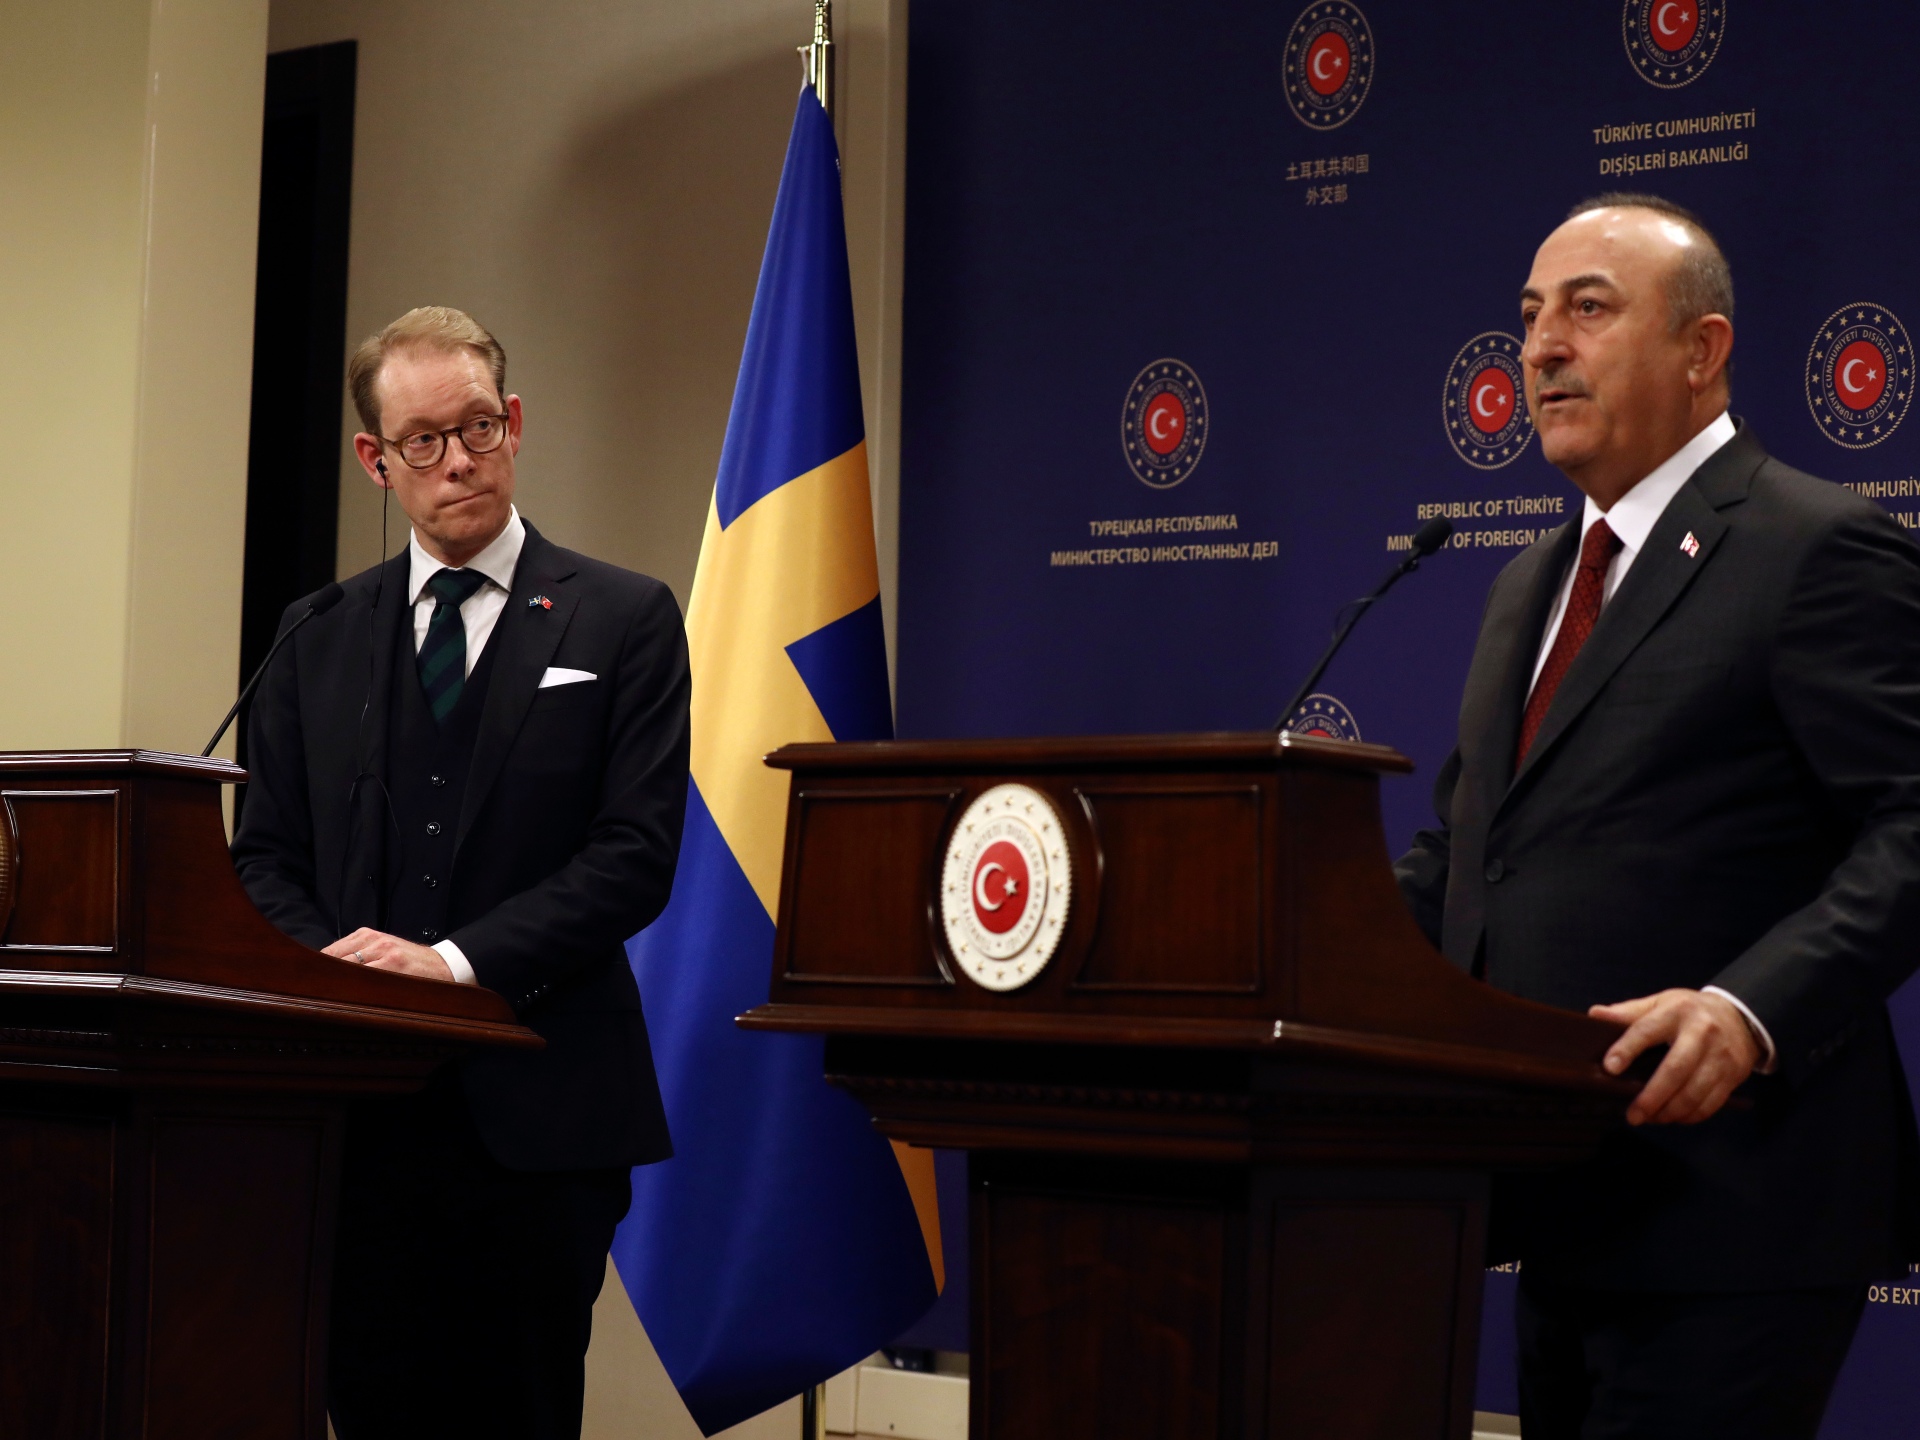 Sweden still has requirements to meet to join NATO: Turkey